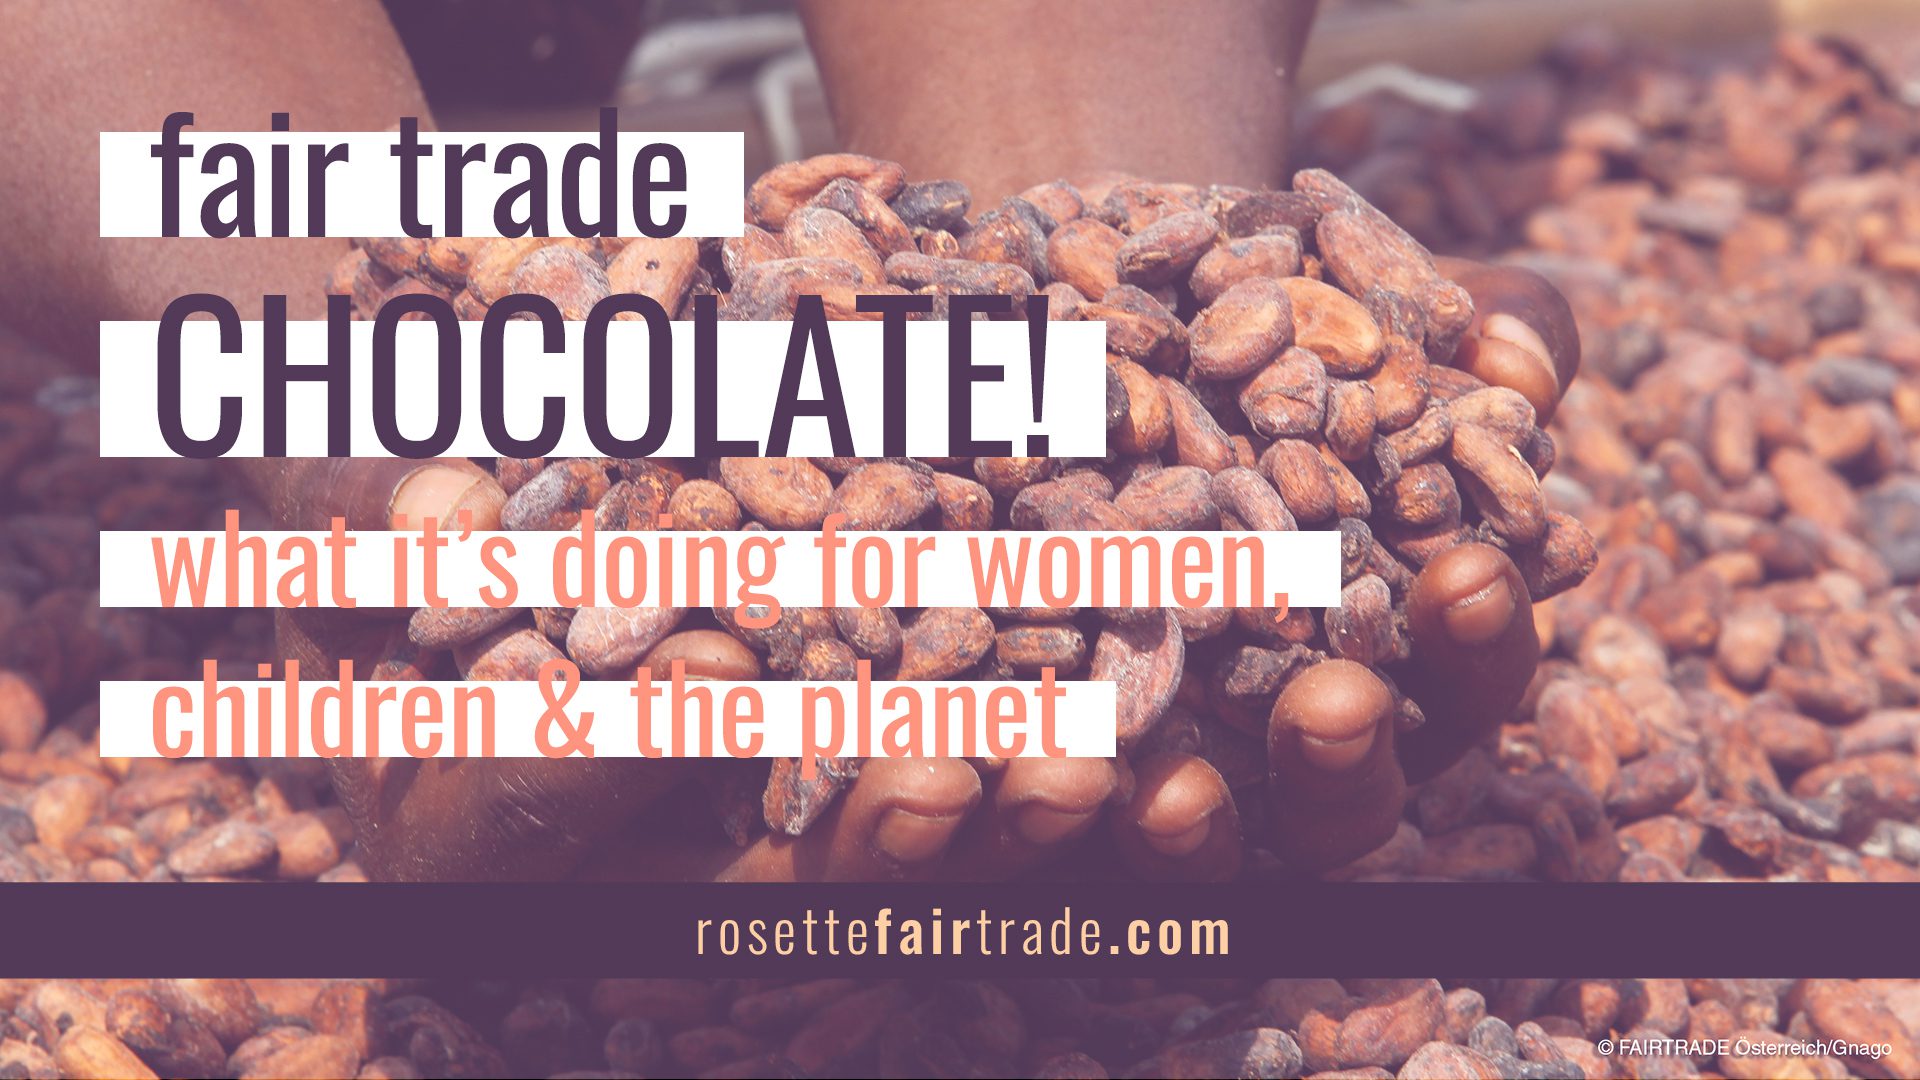 Fair trade chocolate - what it is doing for women children and the planet on Rosette Fair Trade